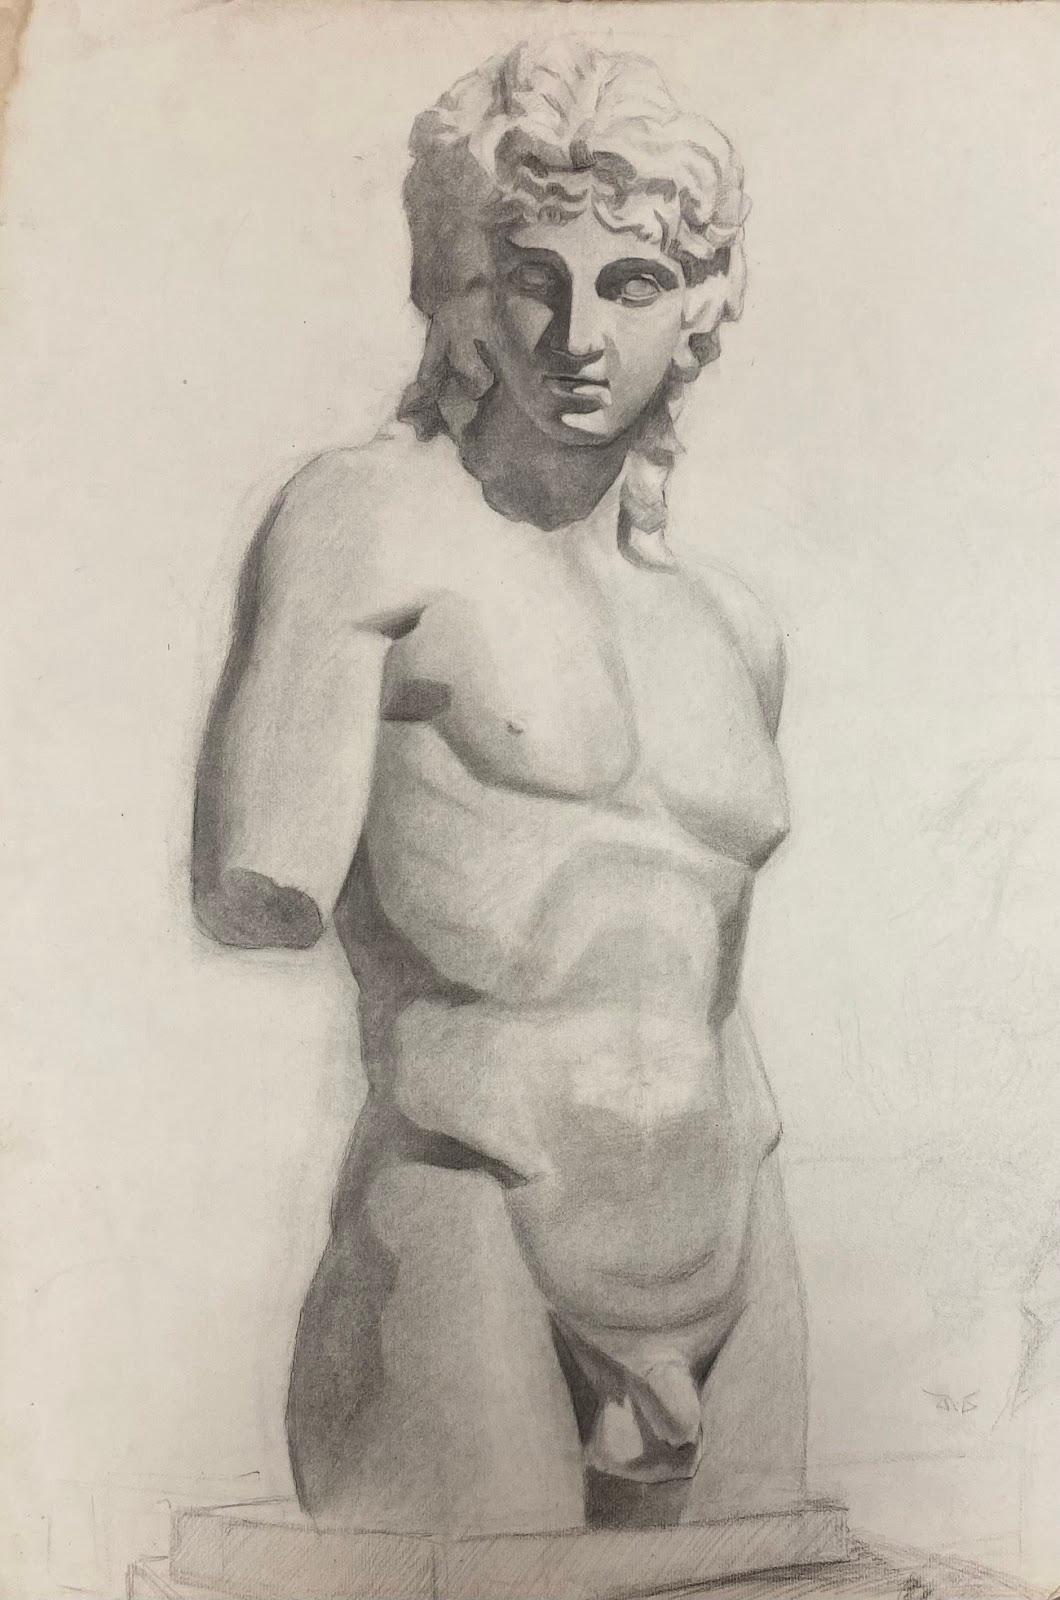 1900s French Atelier Life Drawing Academic Sculpture of Male Nude Figure - Art by Jeanne Nachat